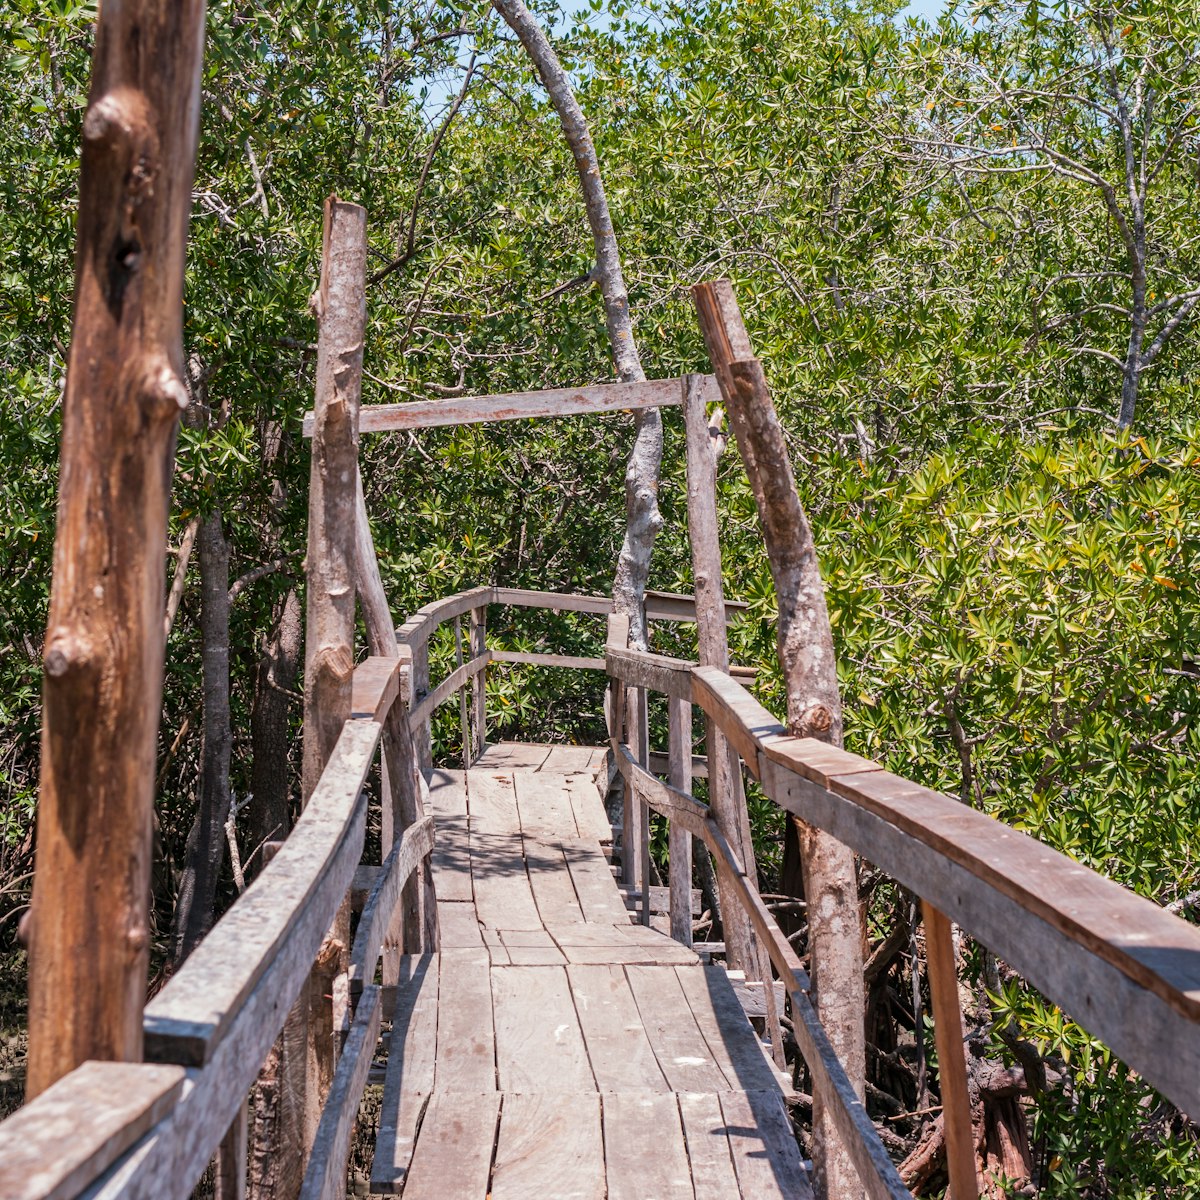 Rustic wooden bridge on the trails of the Curu Wildlife Reserve in Costa Rica.